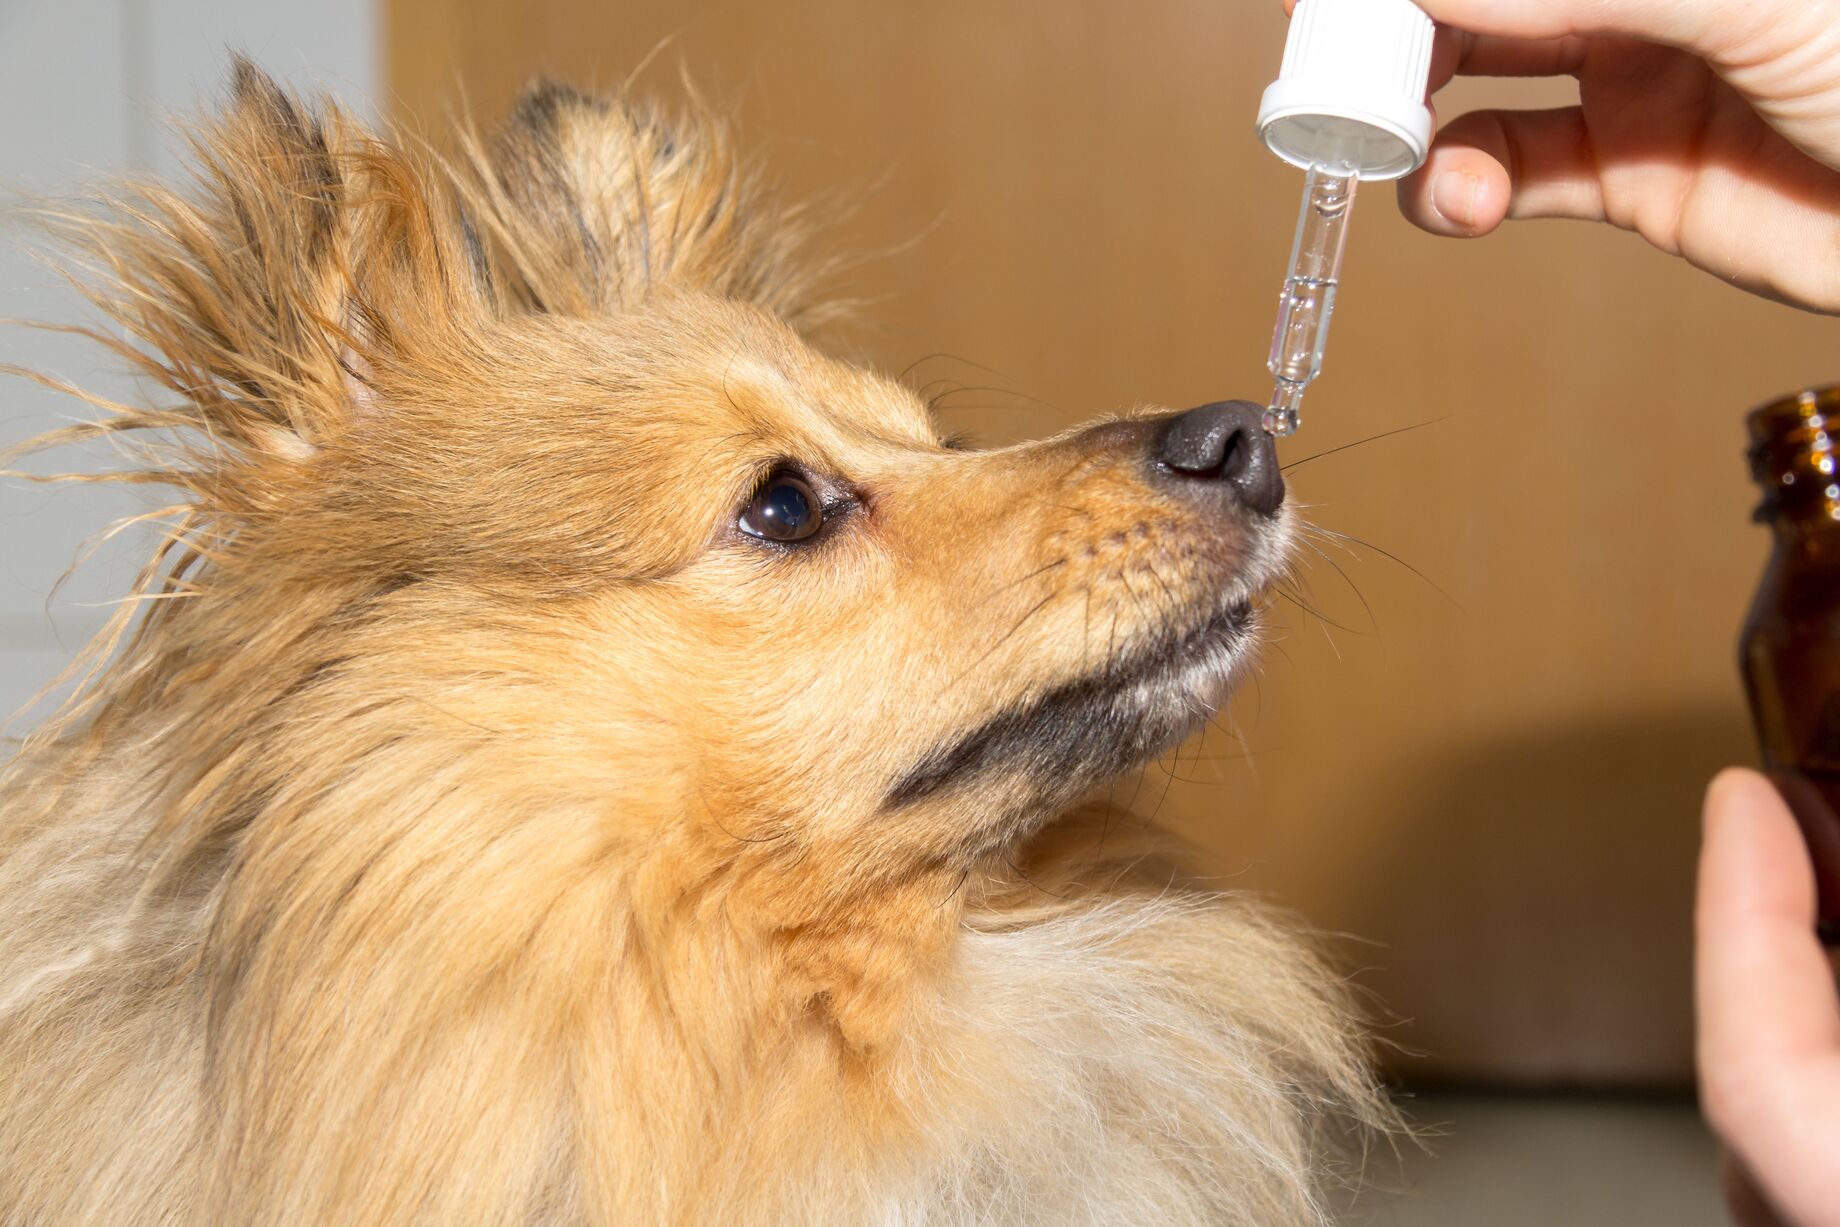 Meloxicam: What Dosage To Give A 20 Lb Dog For Arthritis